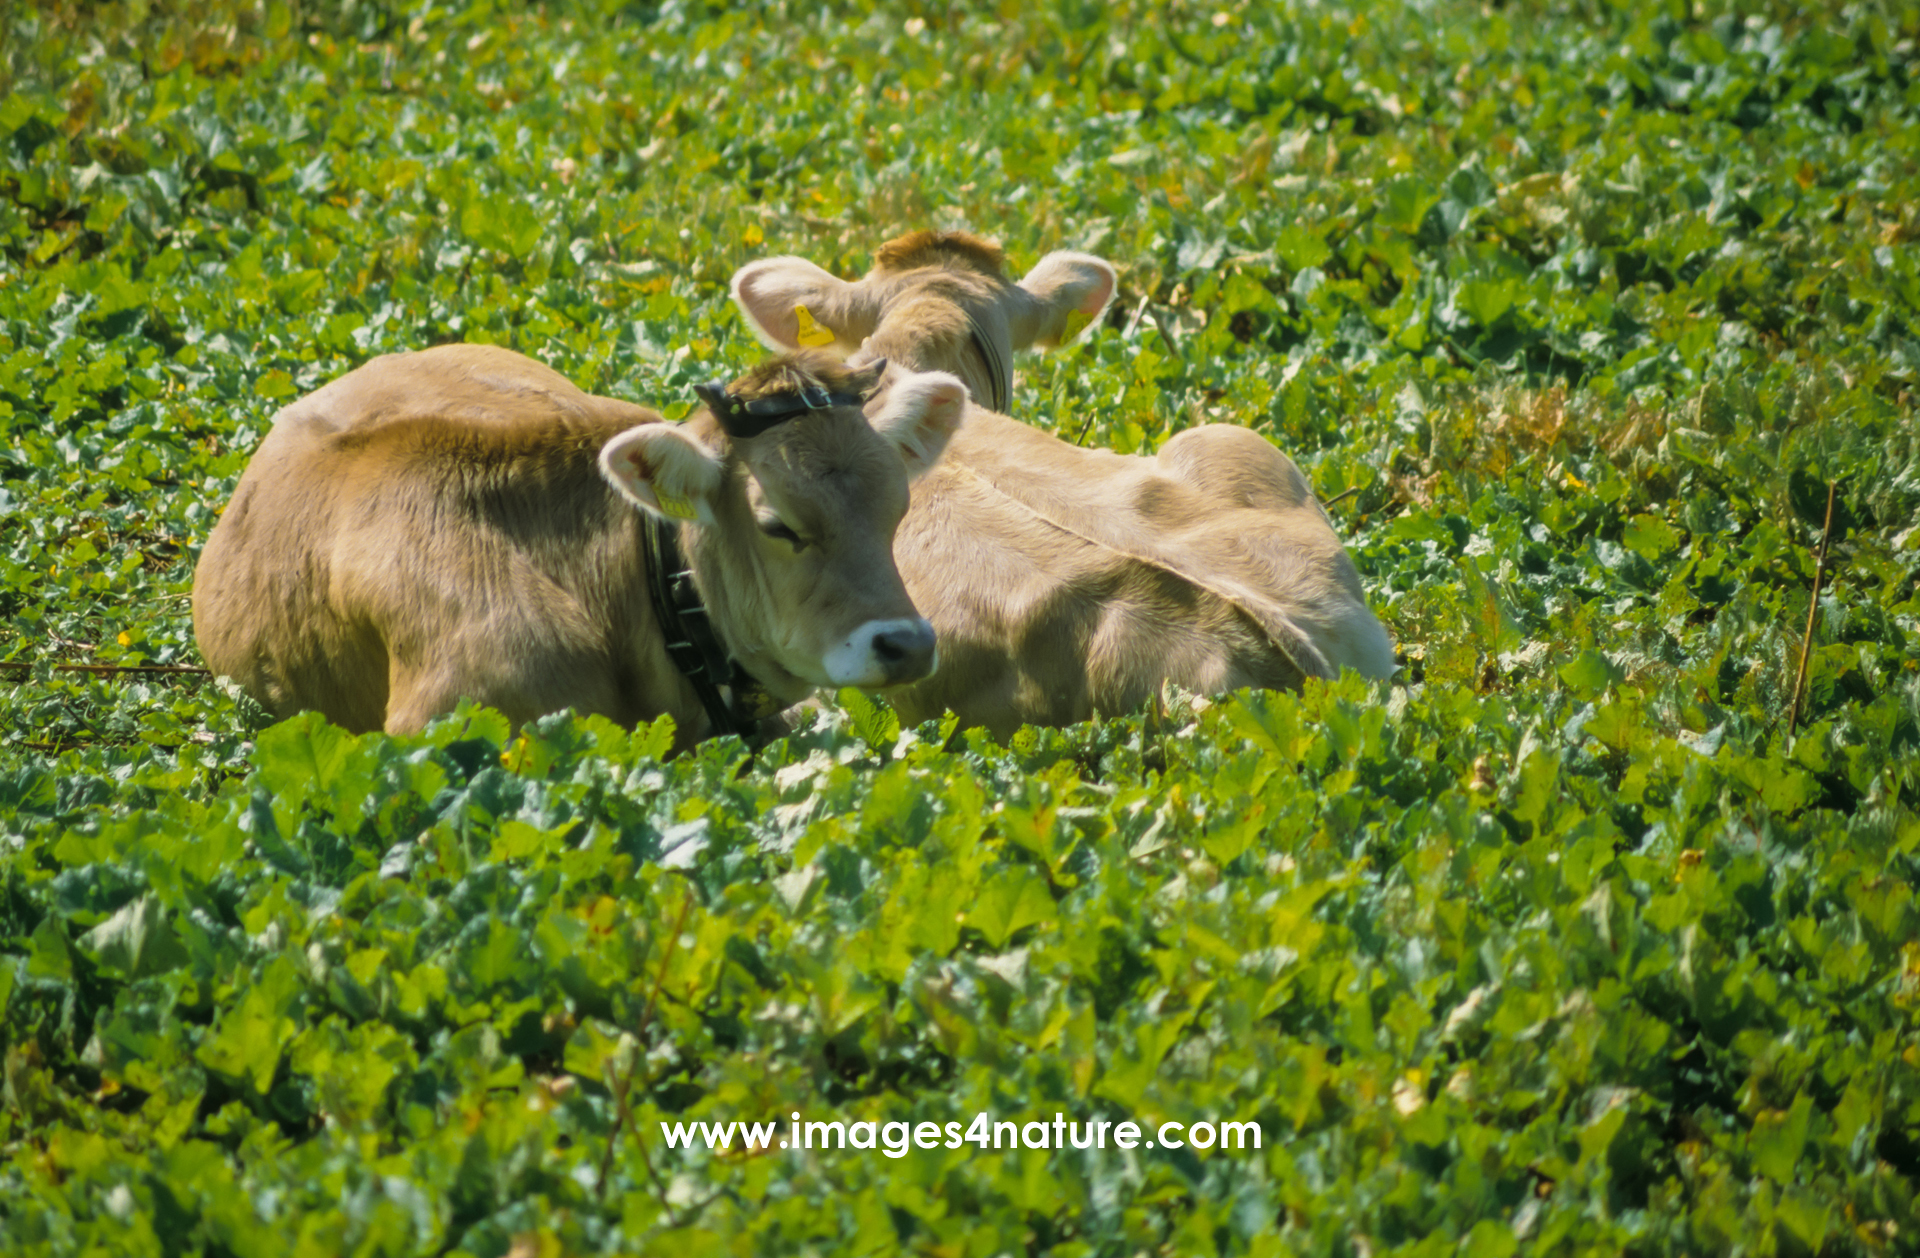 Two brown calfs taking a rest in a bed of green summer leaves